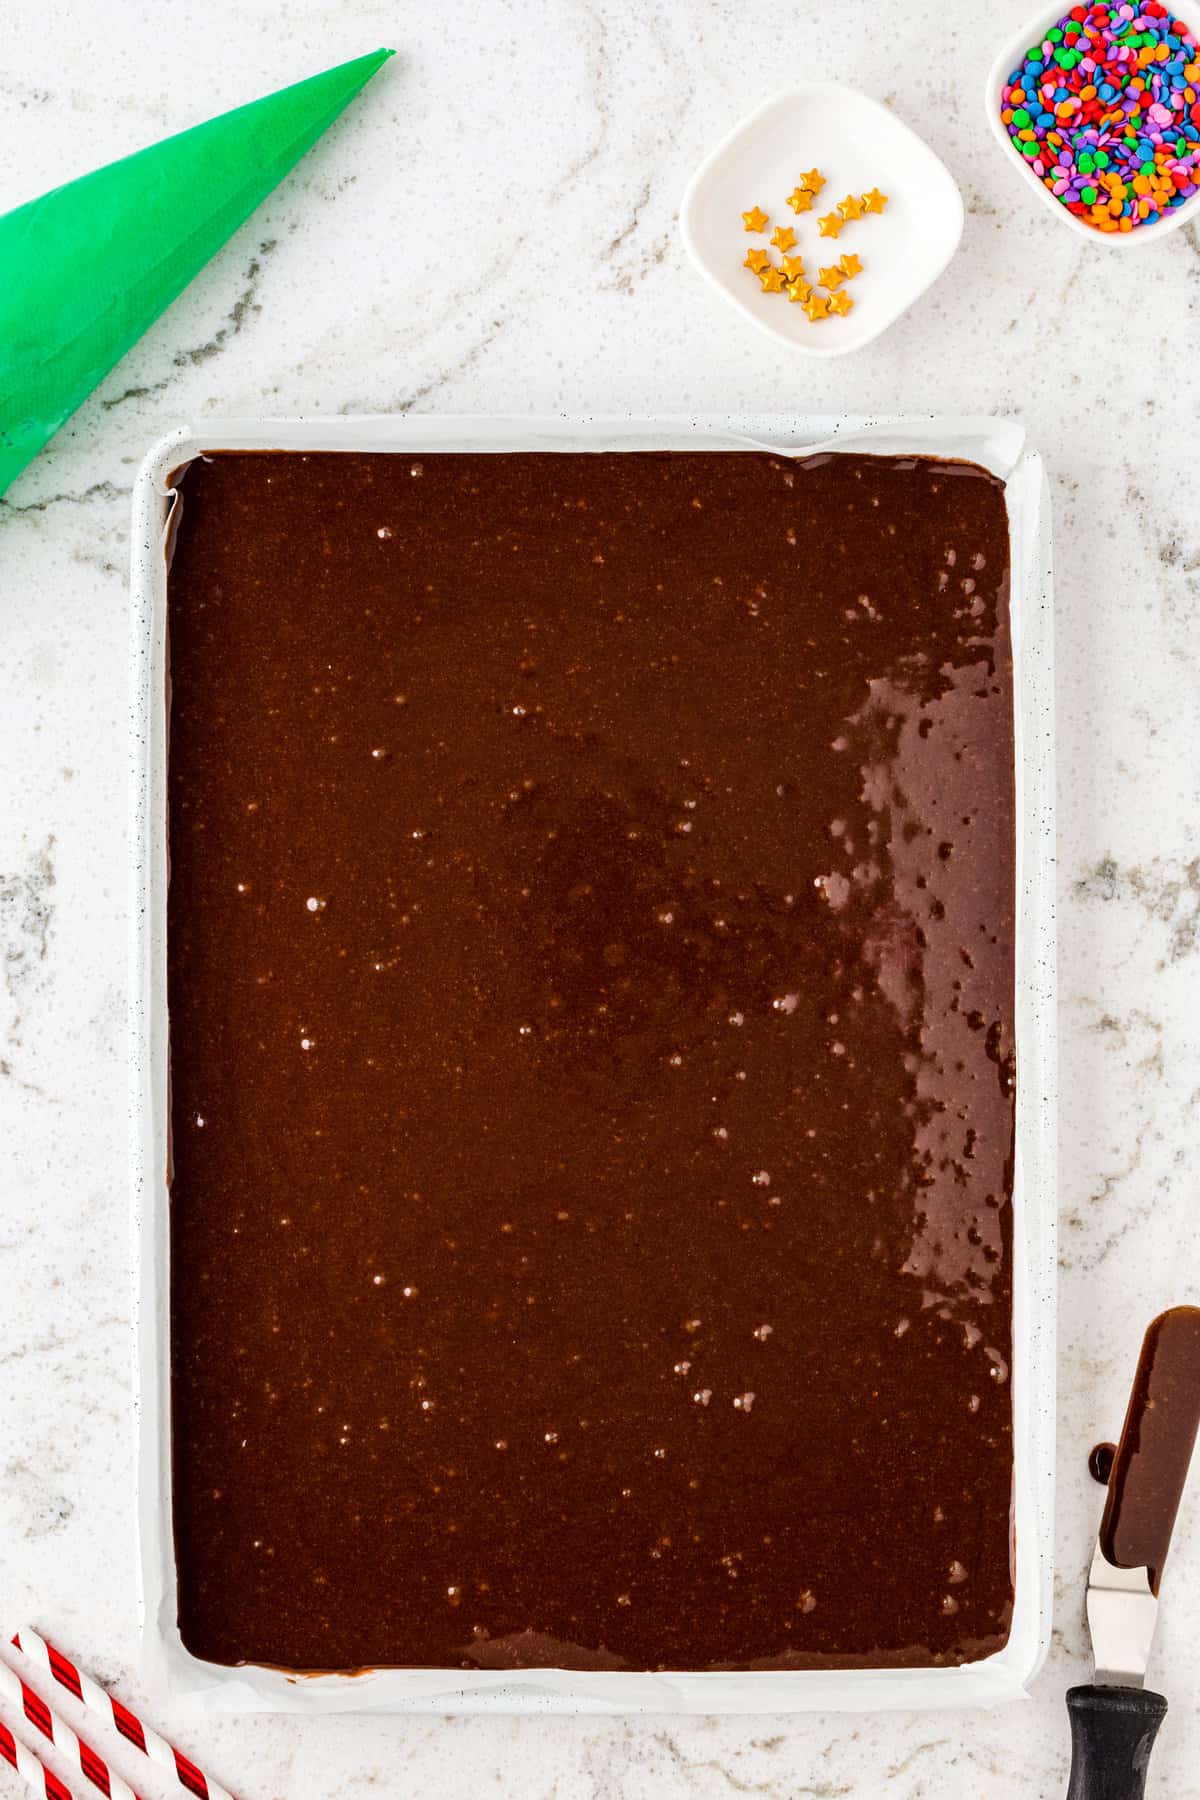 Pour the Brownie Mix into a Jelly Roll Pan lined with Parchment Paper